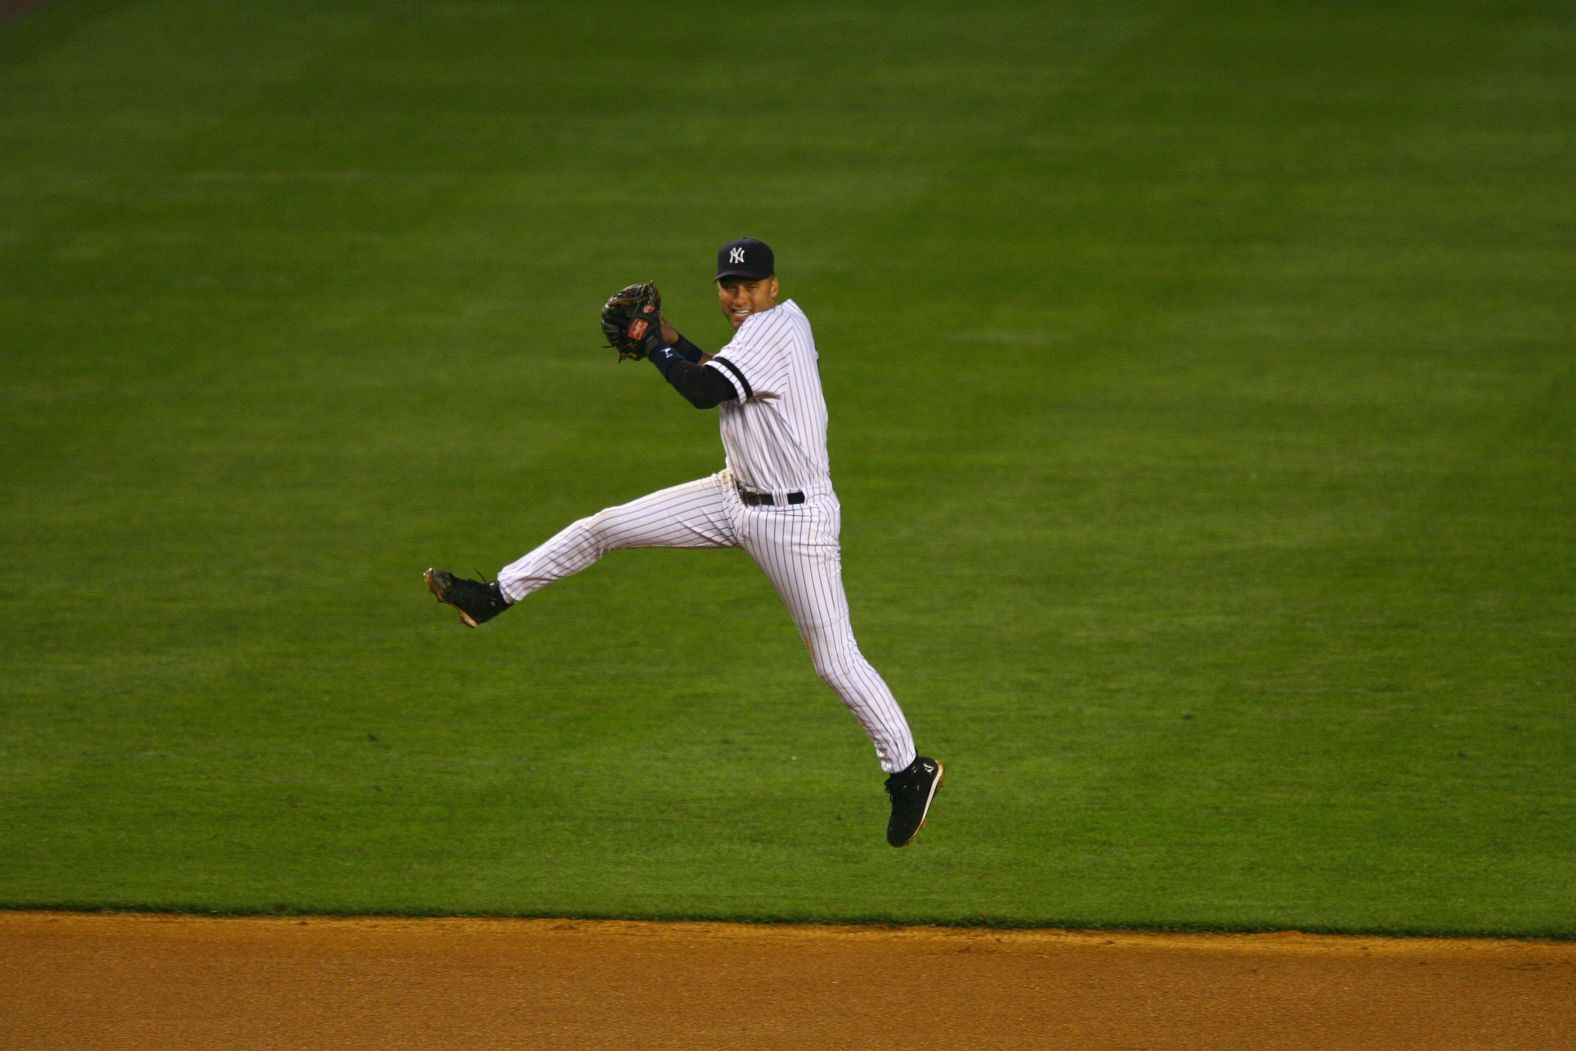 Jeter jumps into the air before throwing the ball to first base in May 2007.